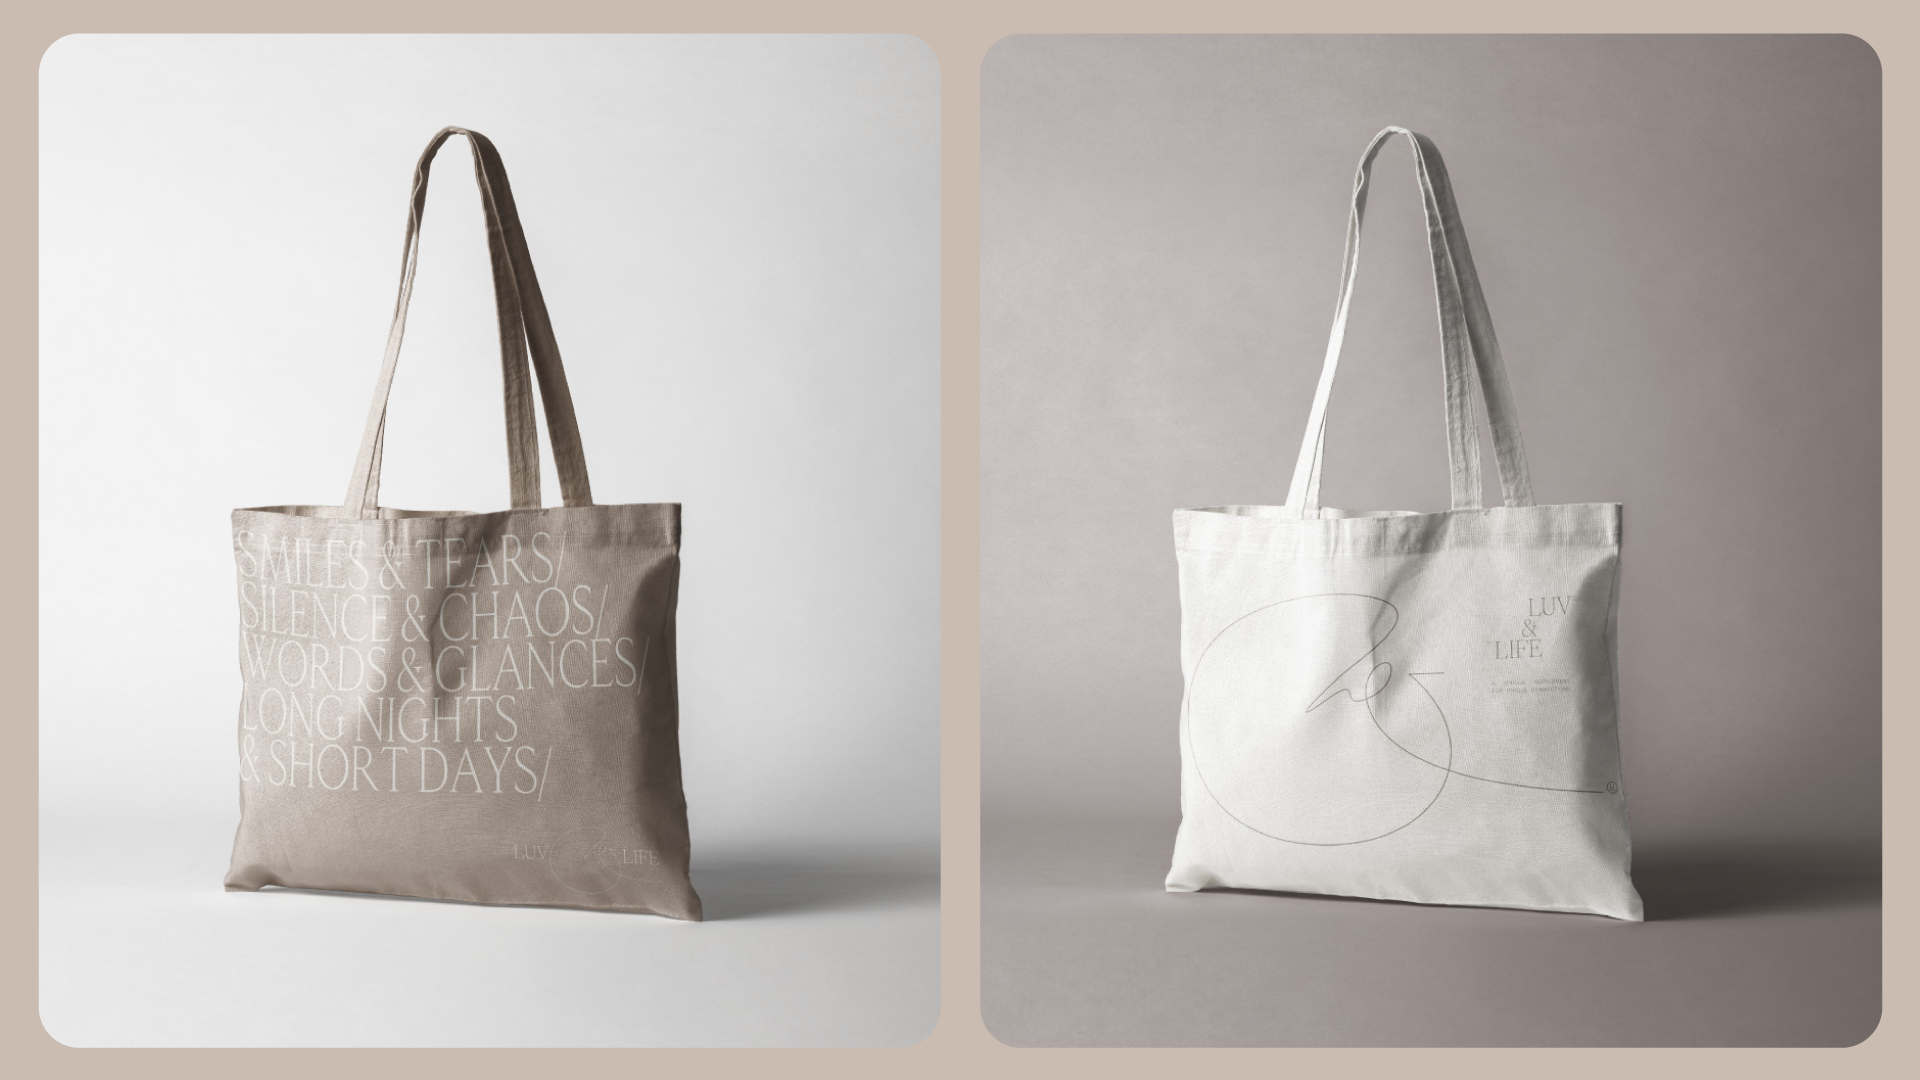 Tote bags with luv and life branding.